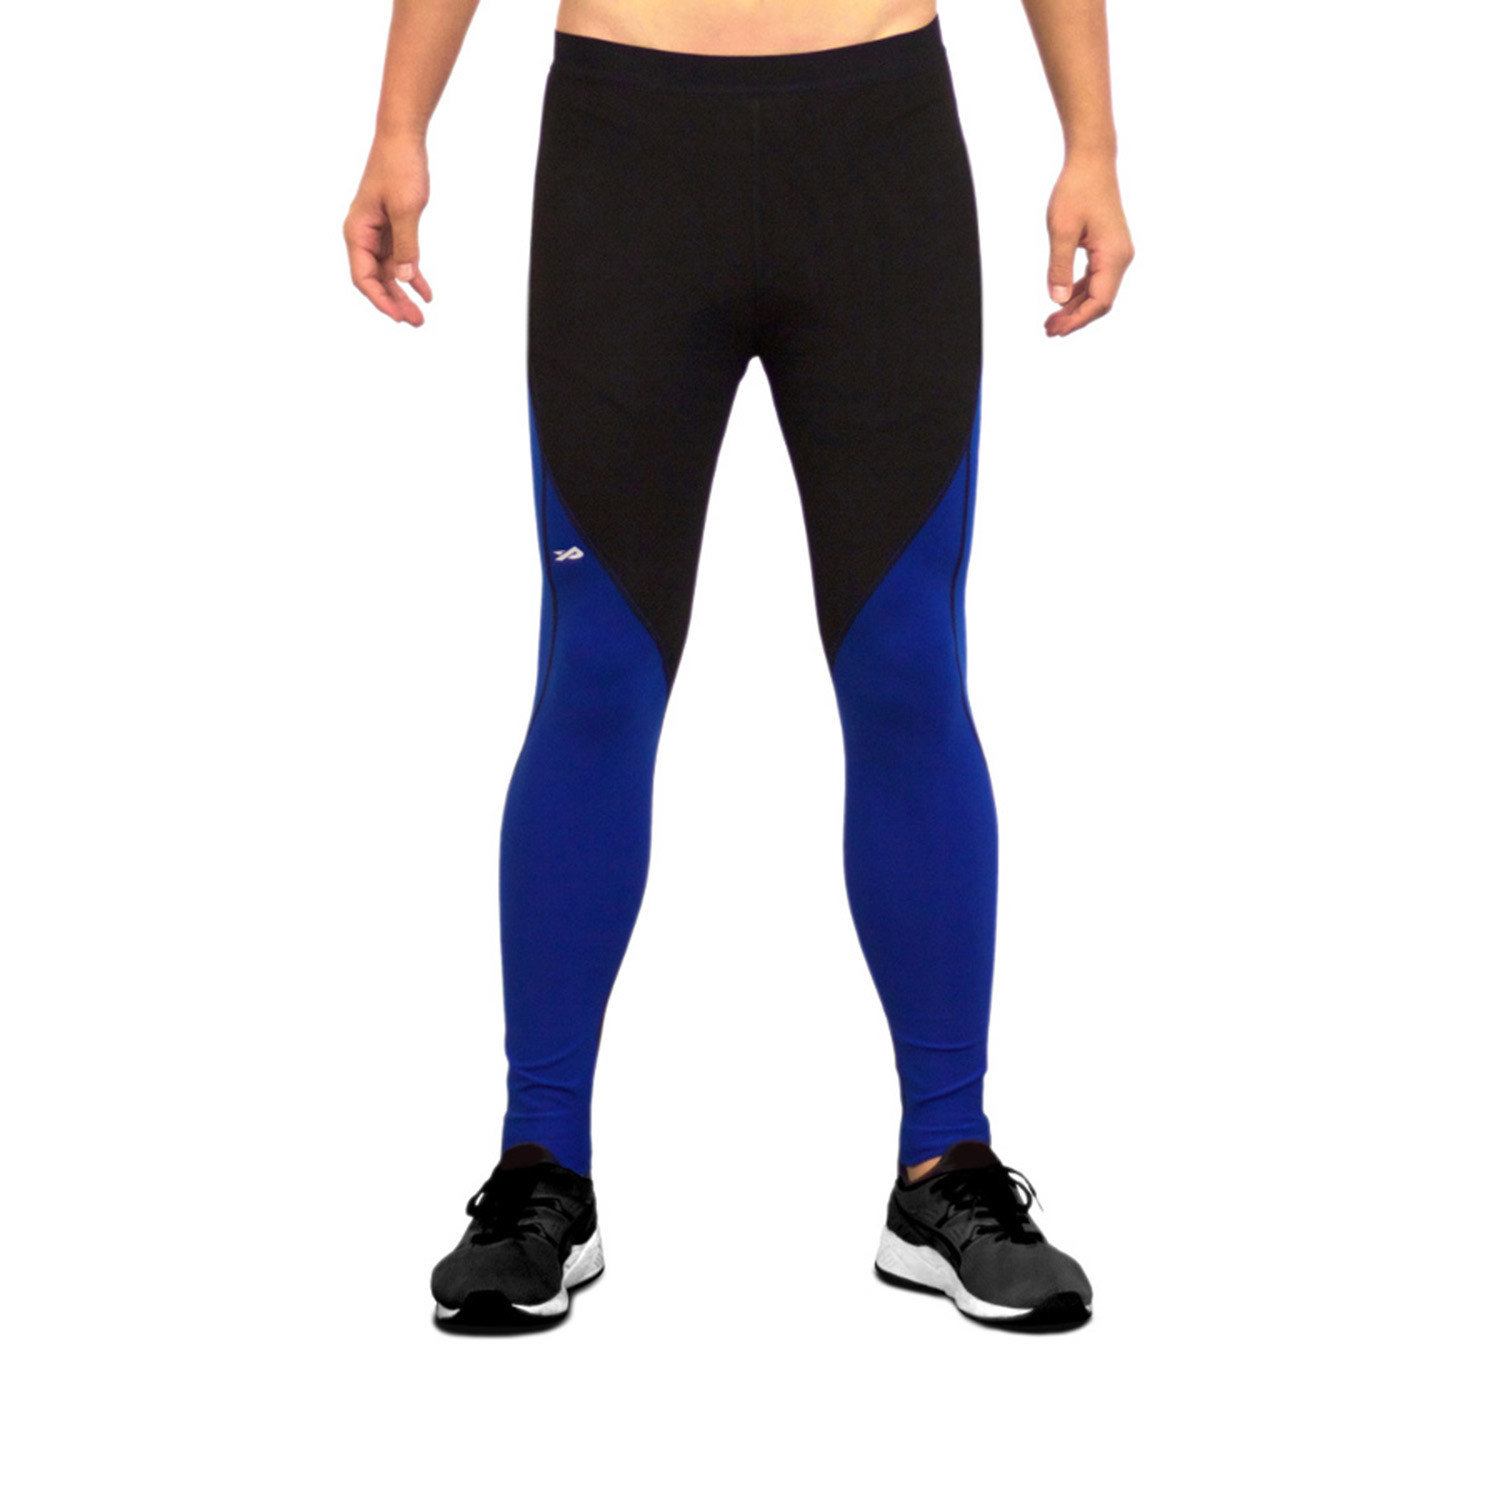 Physiclo Pro Resistance Full-Length Tights // Navy (Large) - Clearance:  Apparel - Touch of Modern